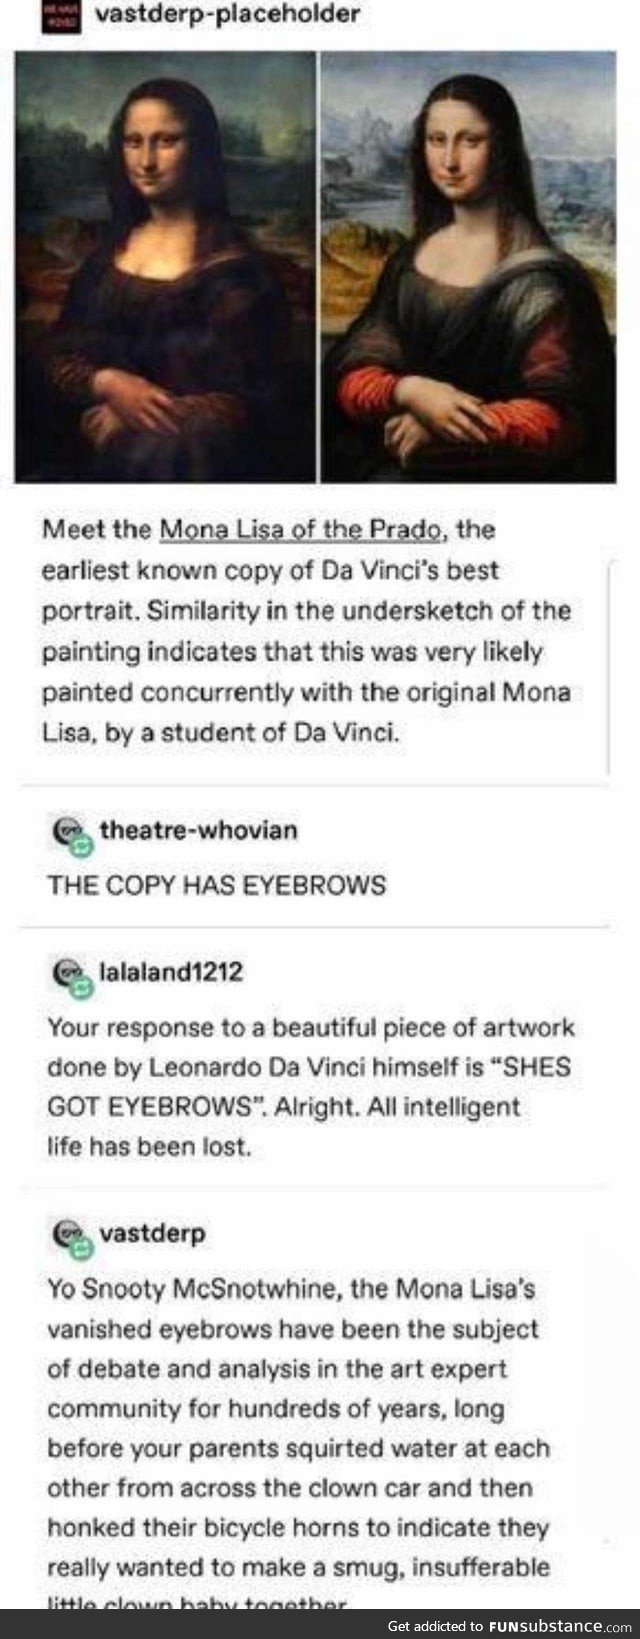 Mona Lisa And The Case of The Missing Eyebrows